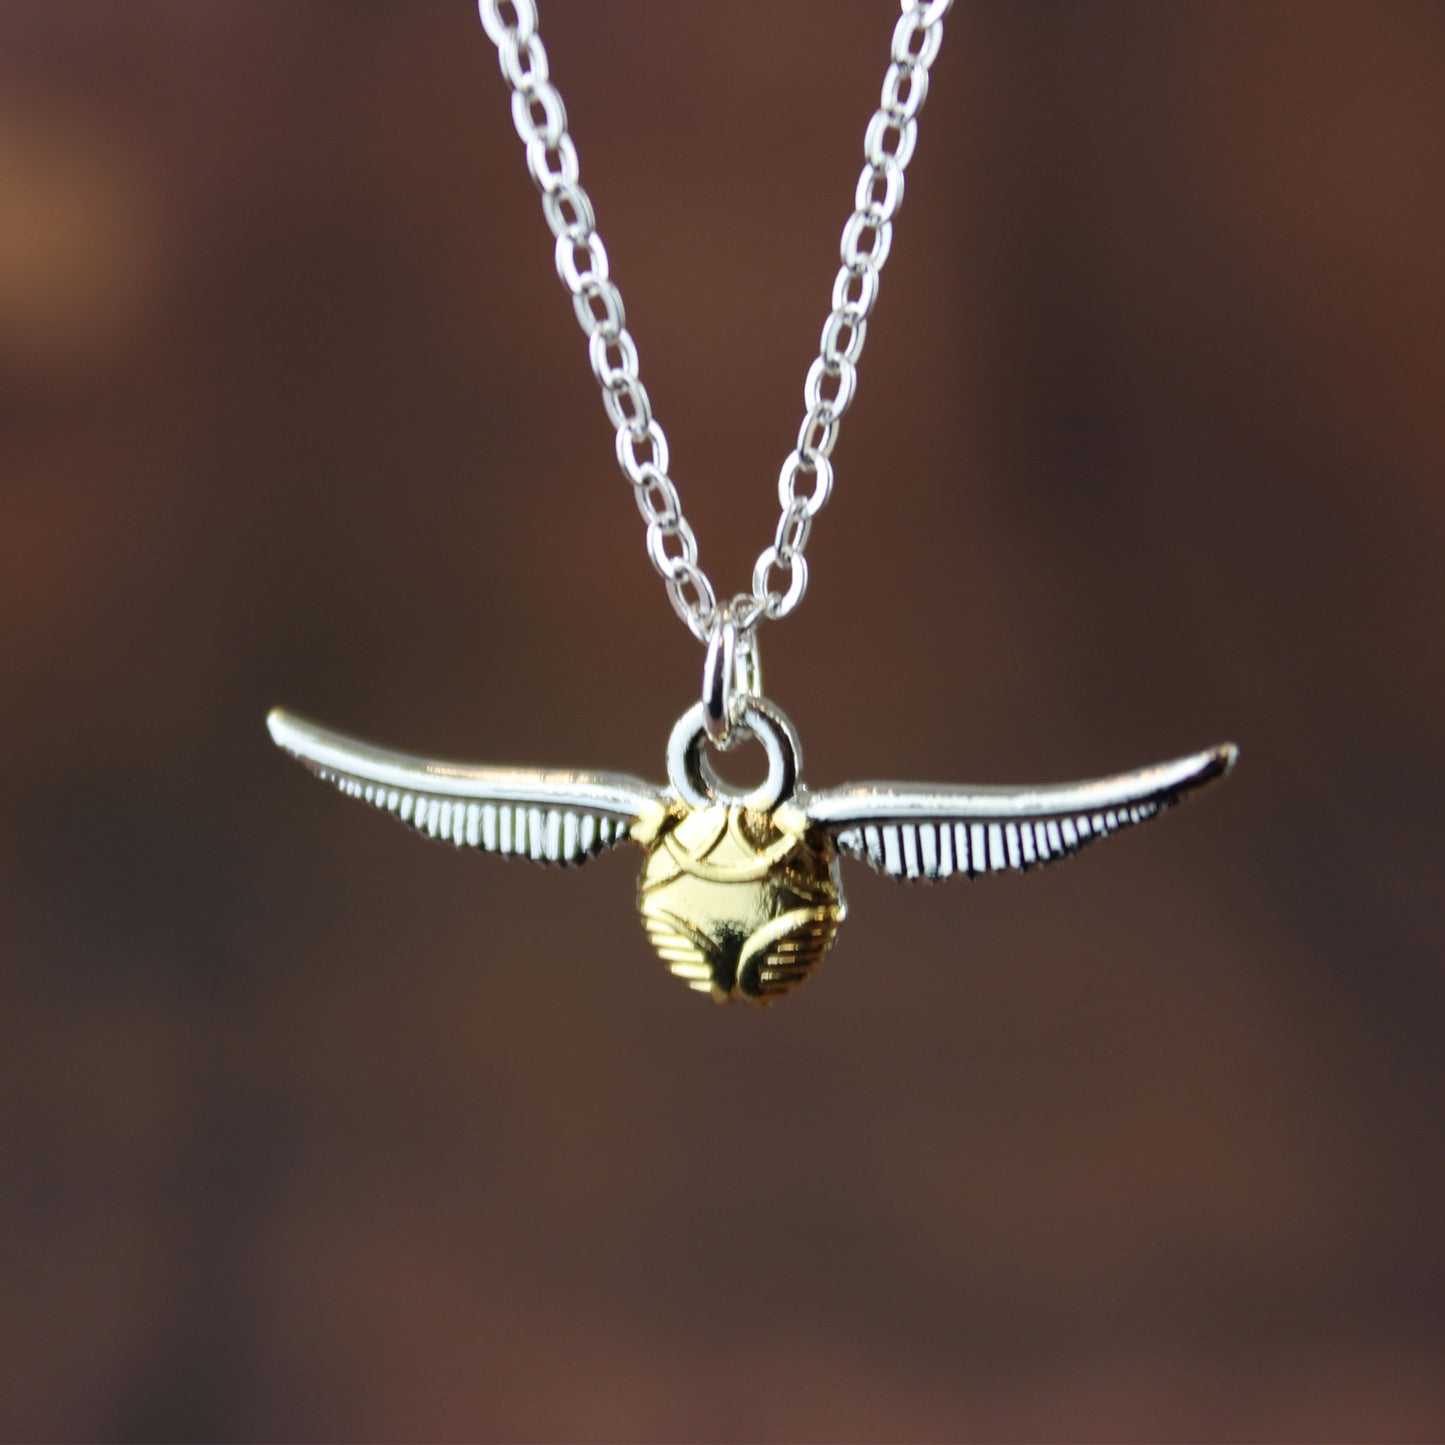 Golden Snitch Harry Potter Necklace (Link Chain)